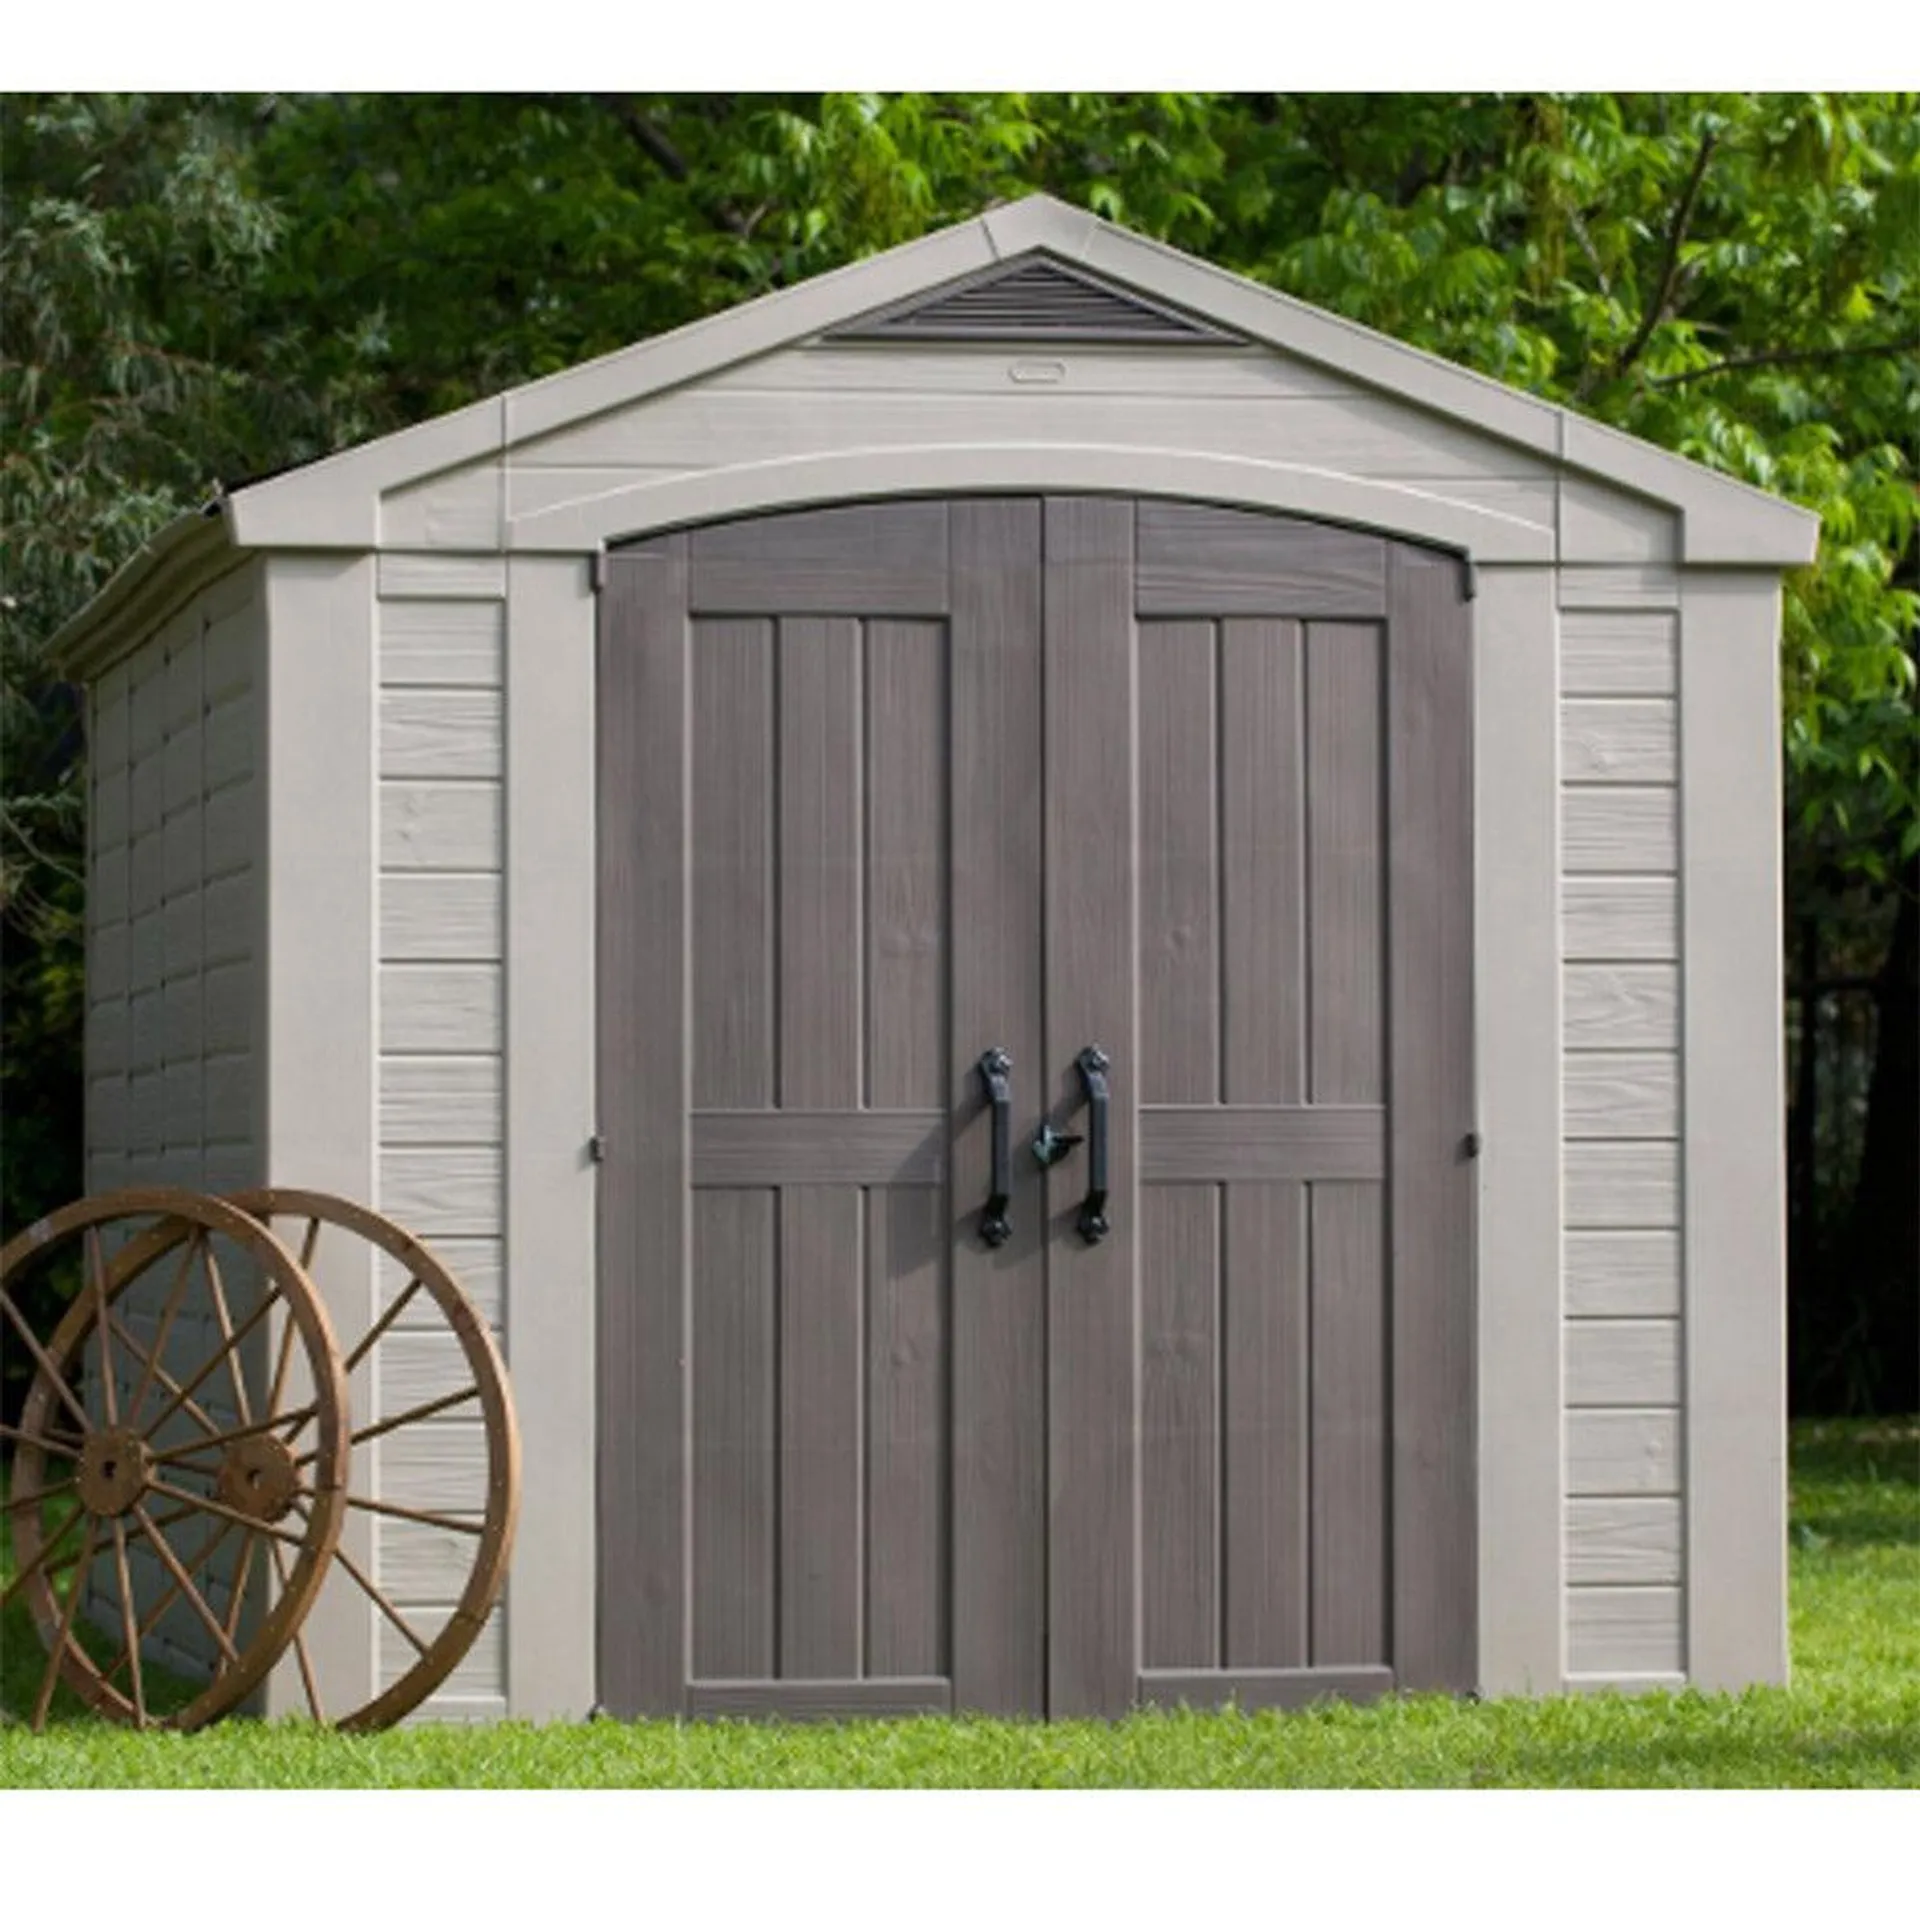 Keter Outdoor Shed 8x11 2565mm x 3315mm